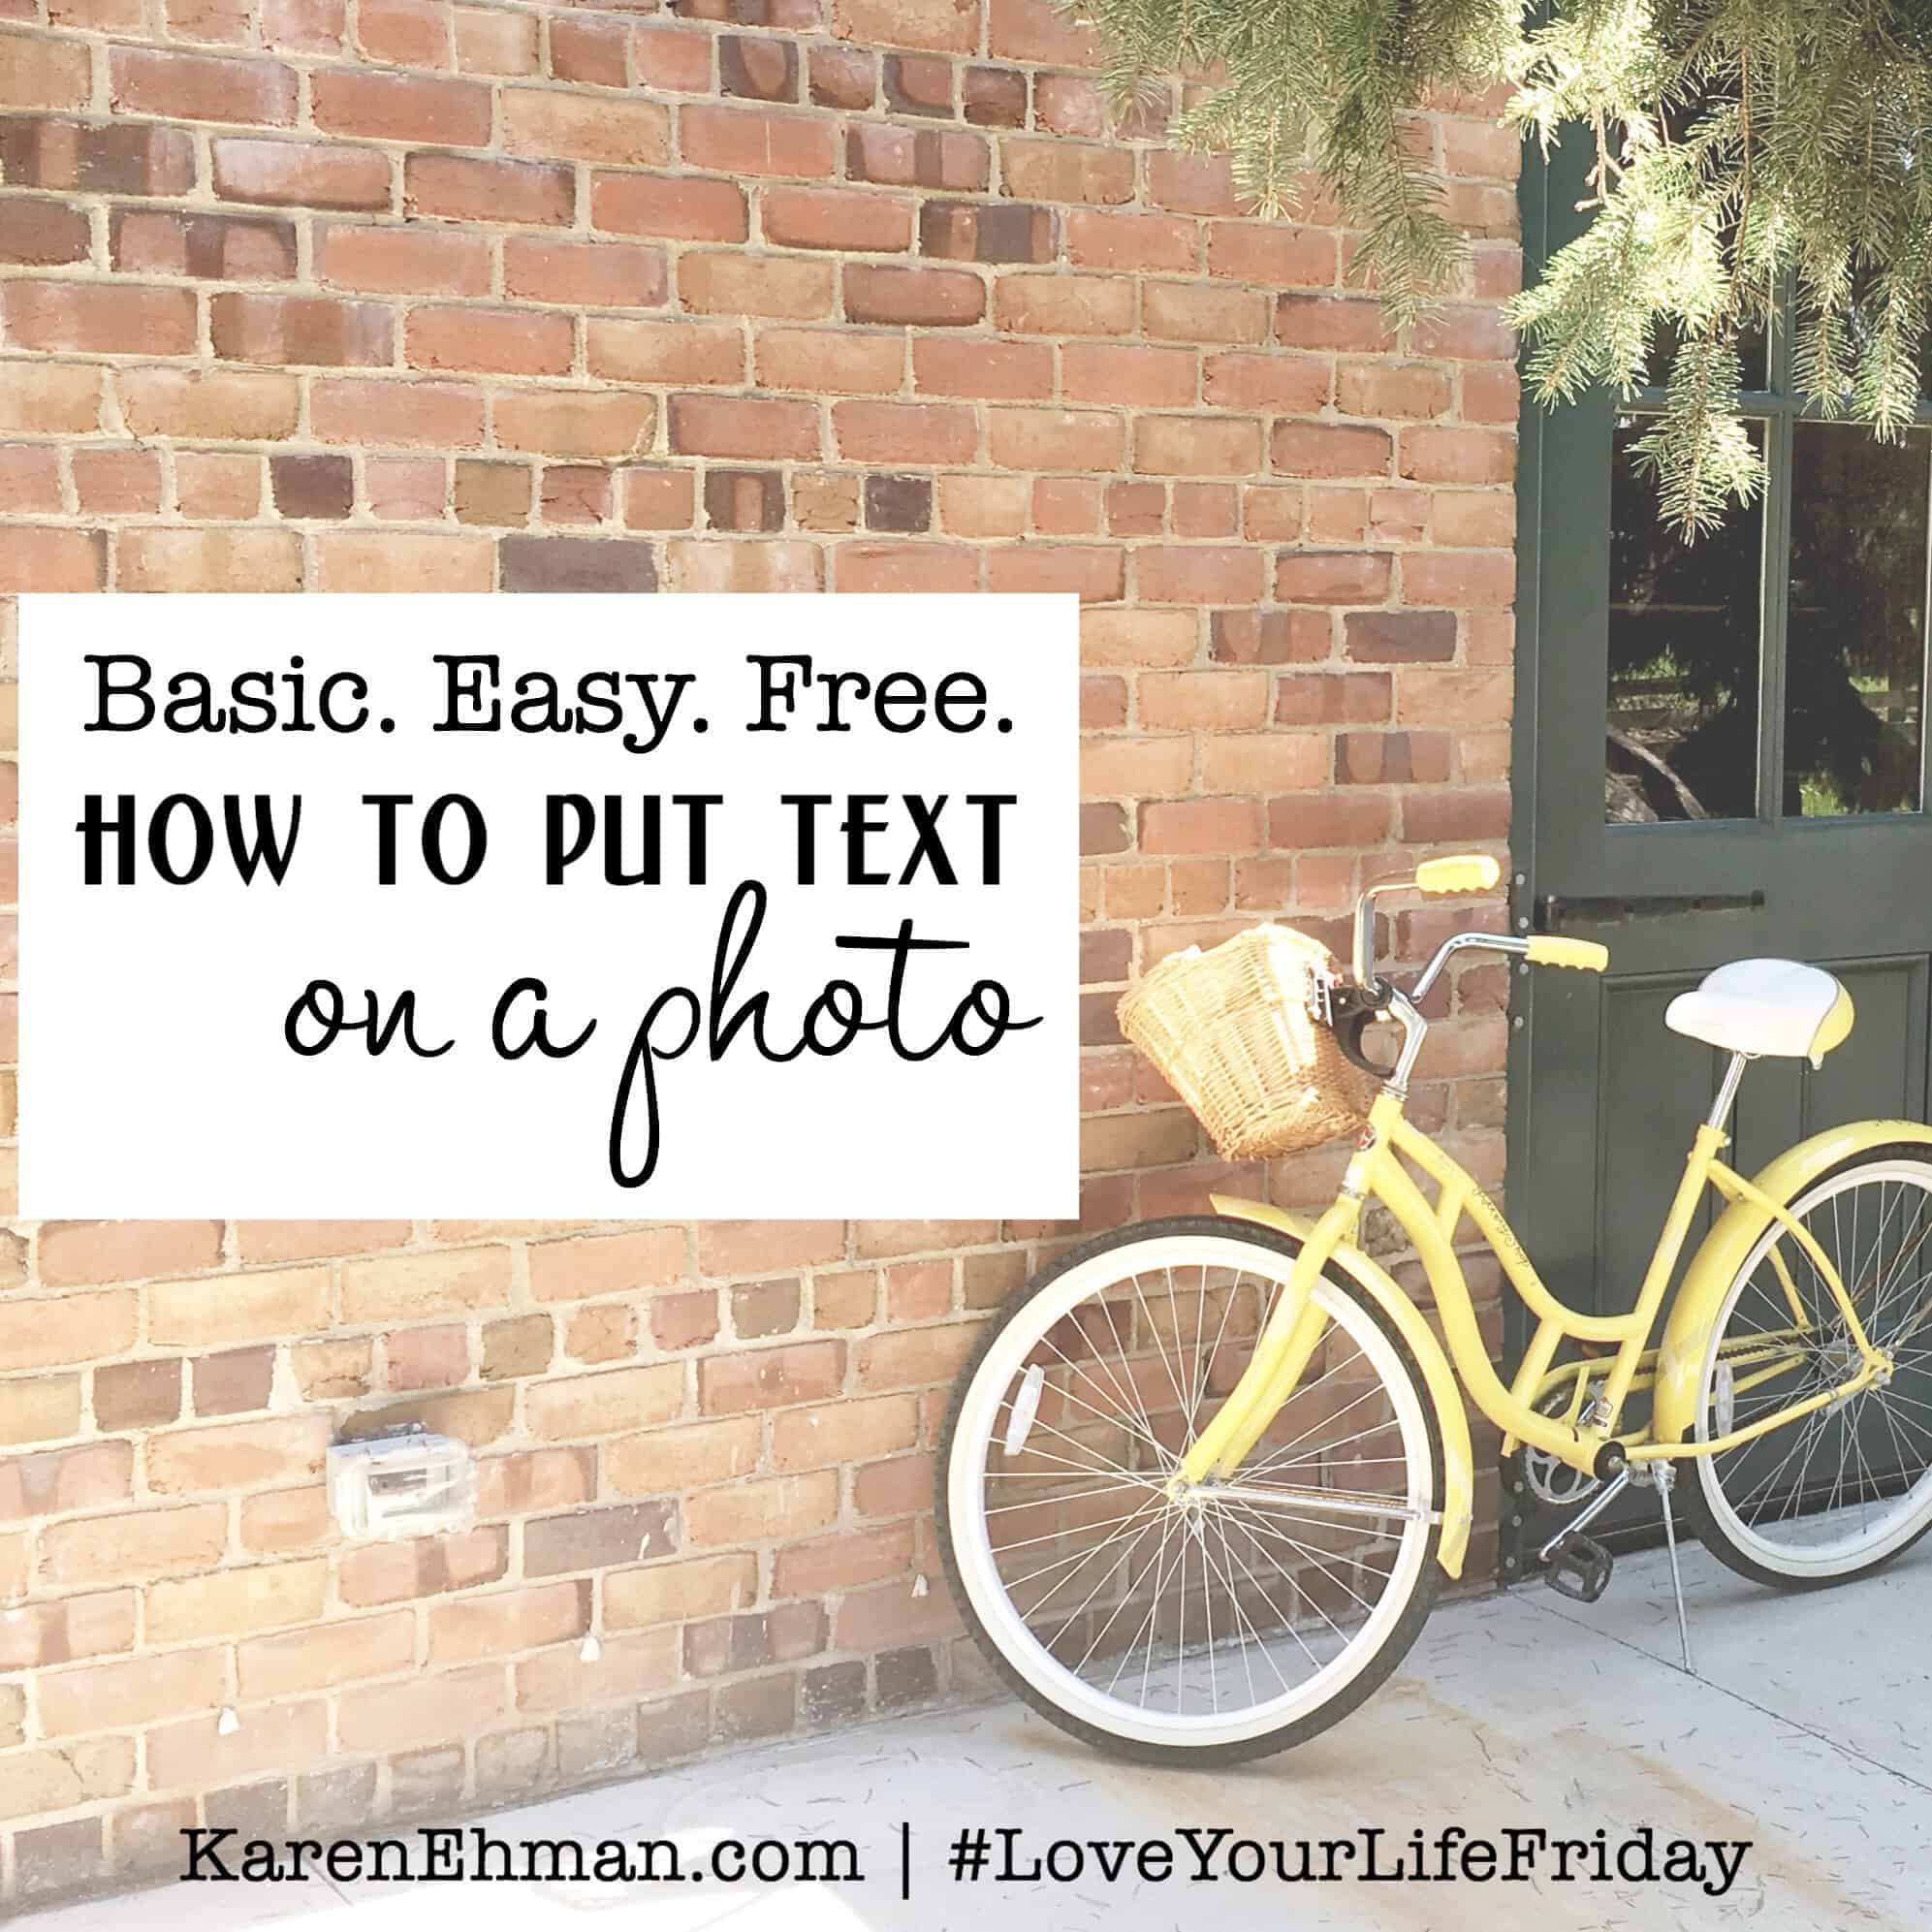 Basic. Easy. Free. How to put text on a photo by Lindsey Feldpausch for #loveyourlifefriday at karenehman.com.